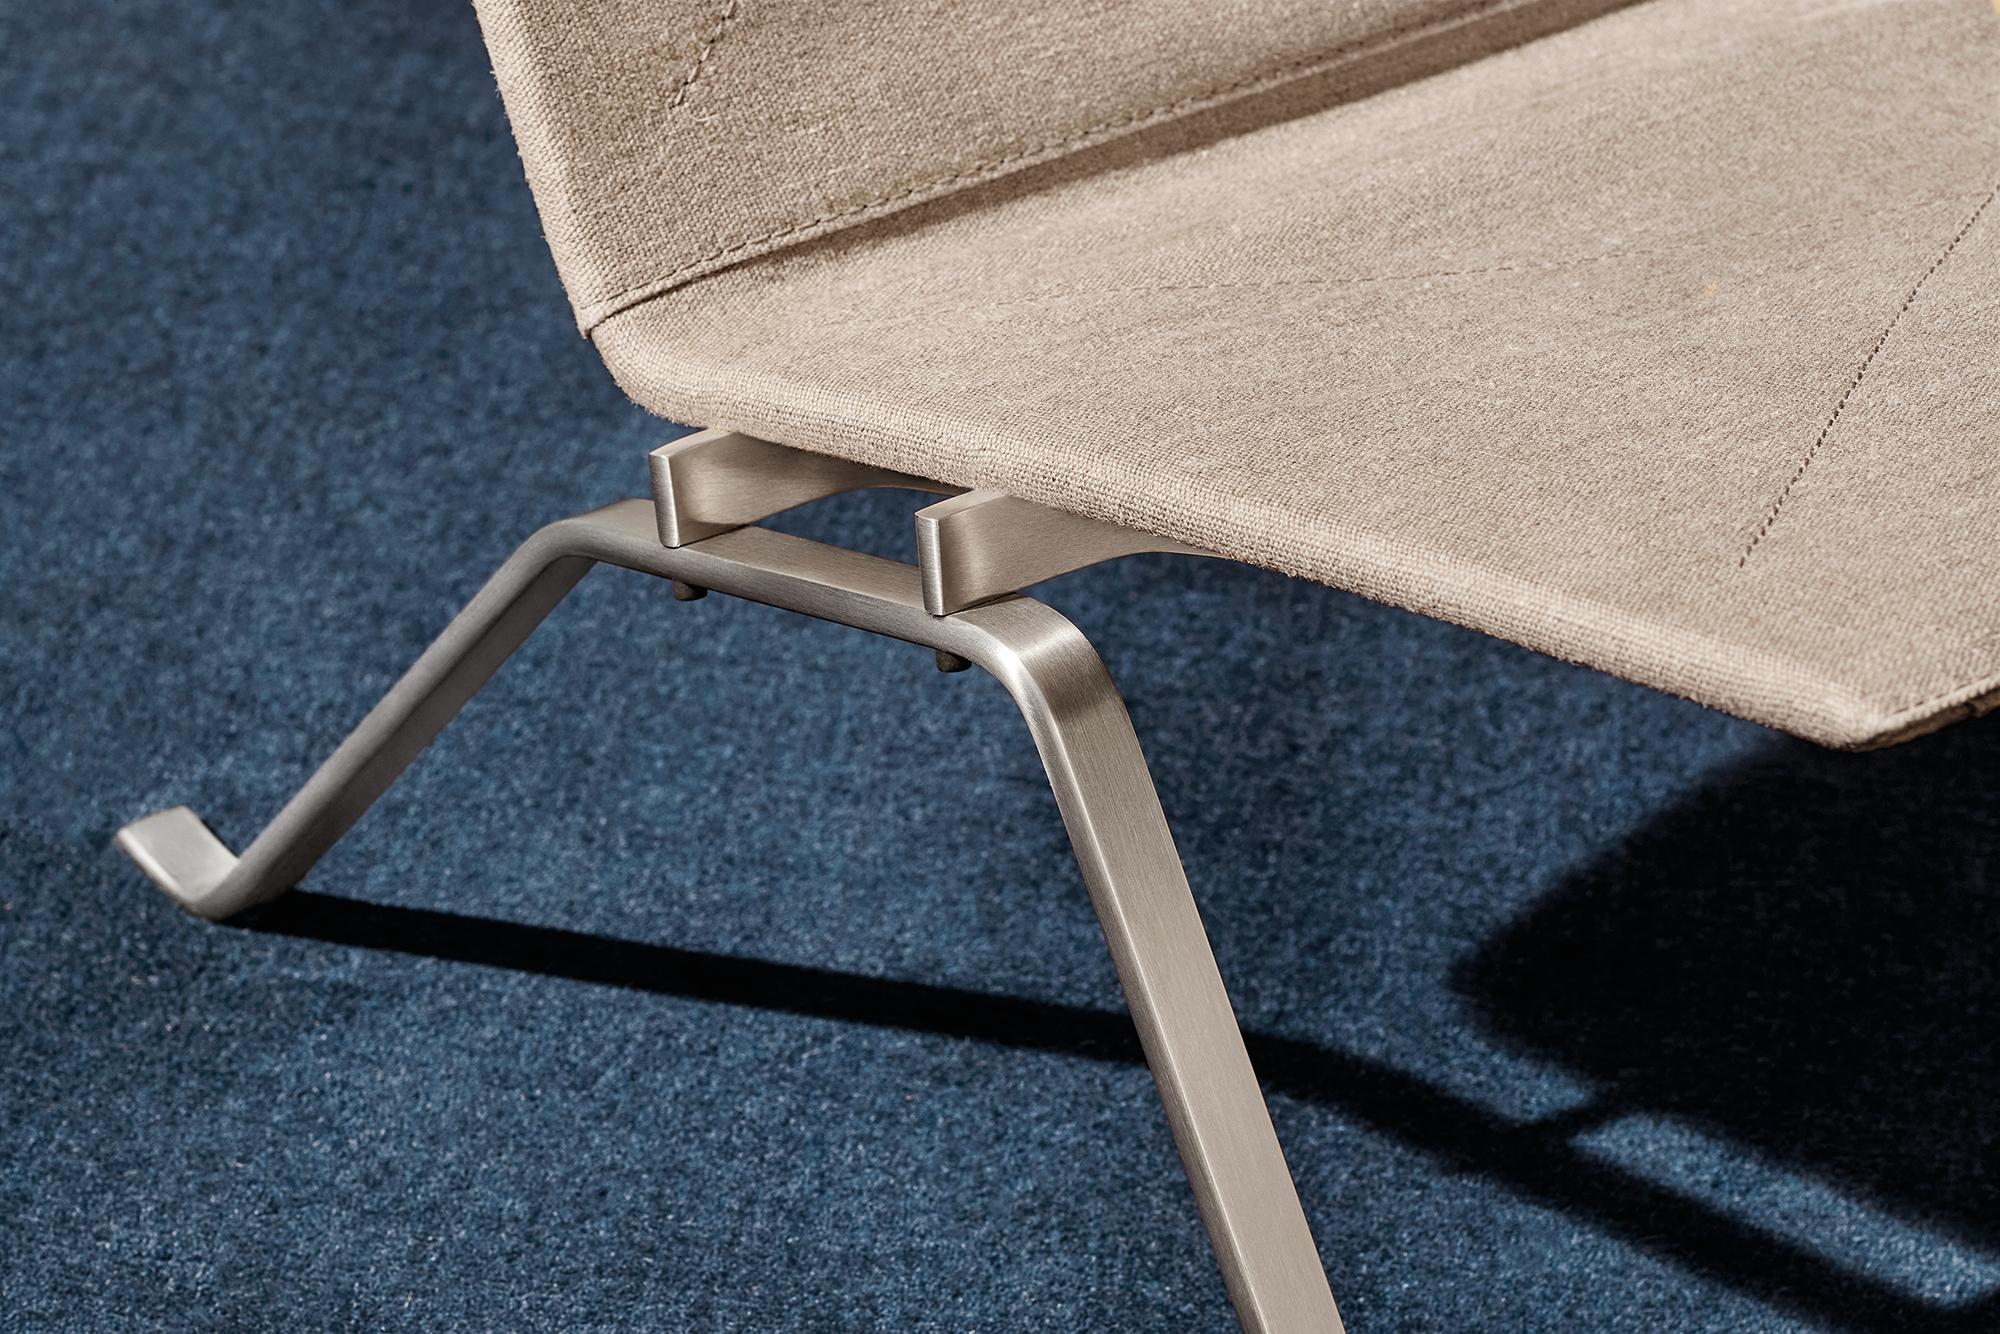 Poul Kjærholm 'PK22' Lounge Chair for Fritz Hansen in Canvas.

Established in 1872, Fritz Hansen has become synonymous with legendary Danish design. Combining timeless craftsmanship with an emphasis on sustainability, the brand’s re-editions of